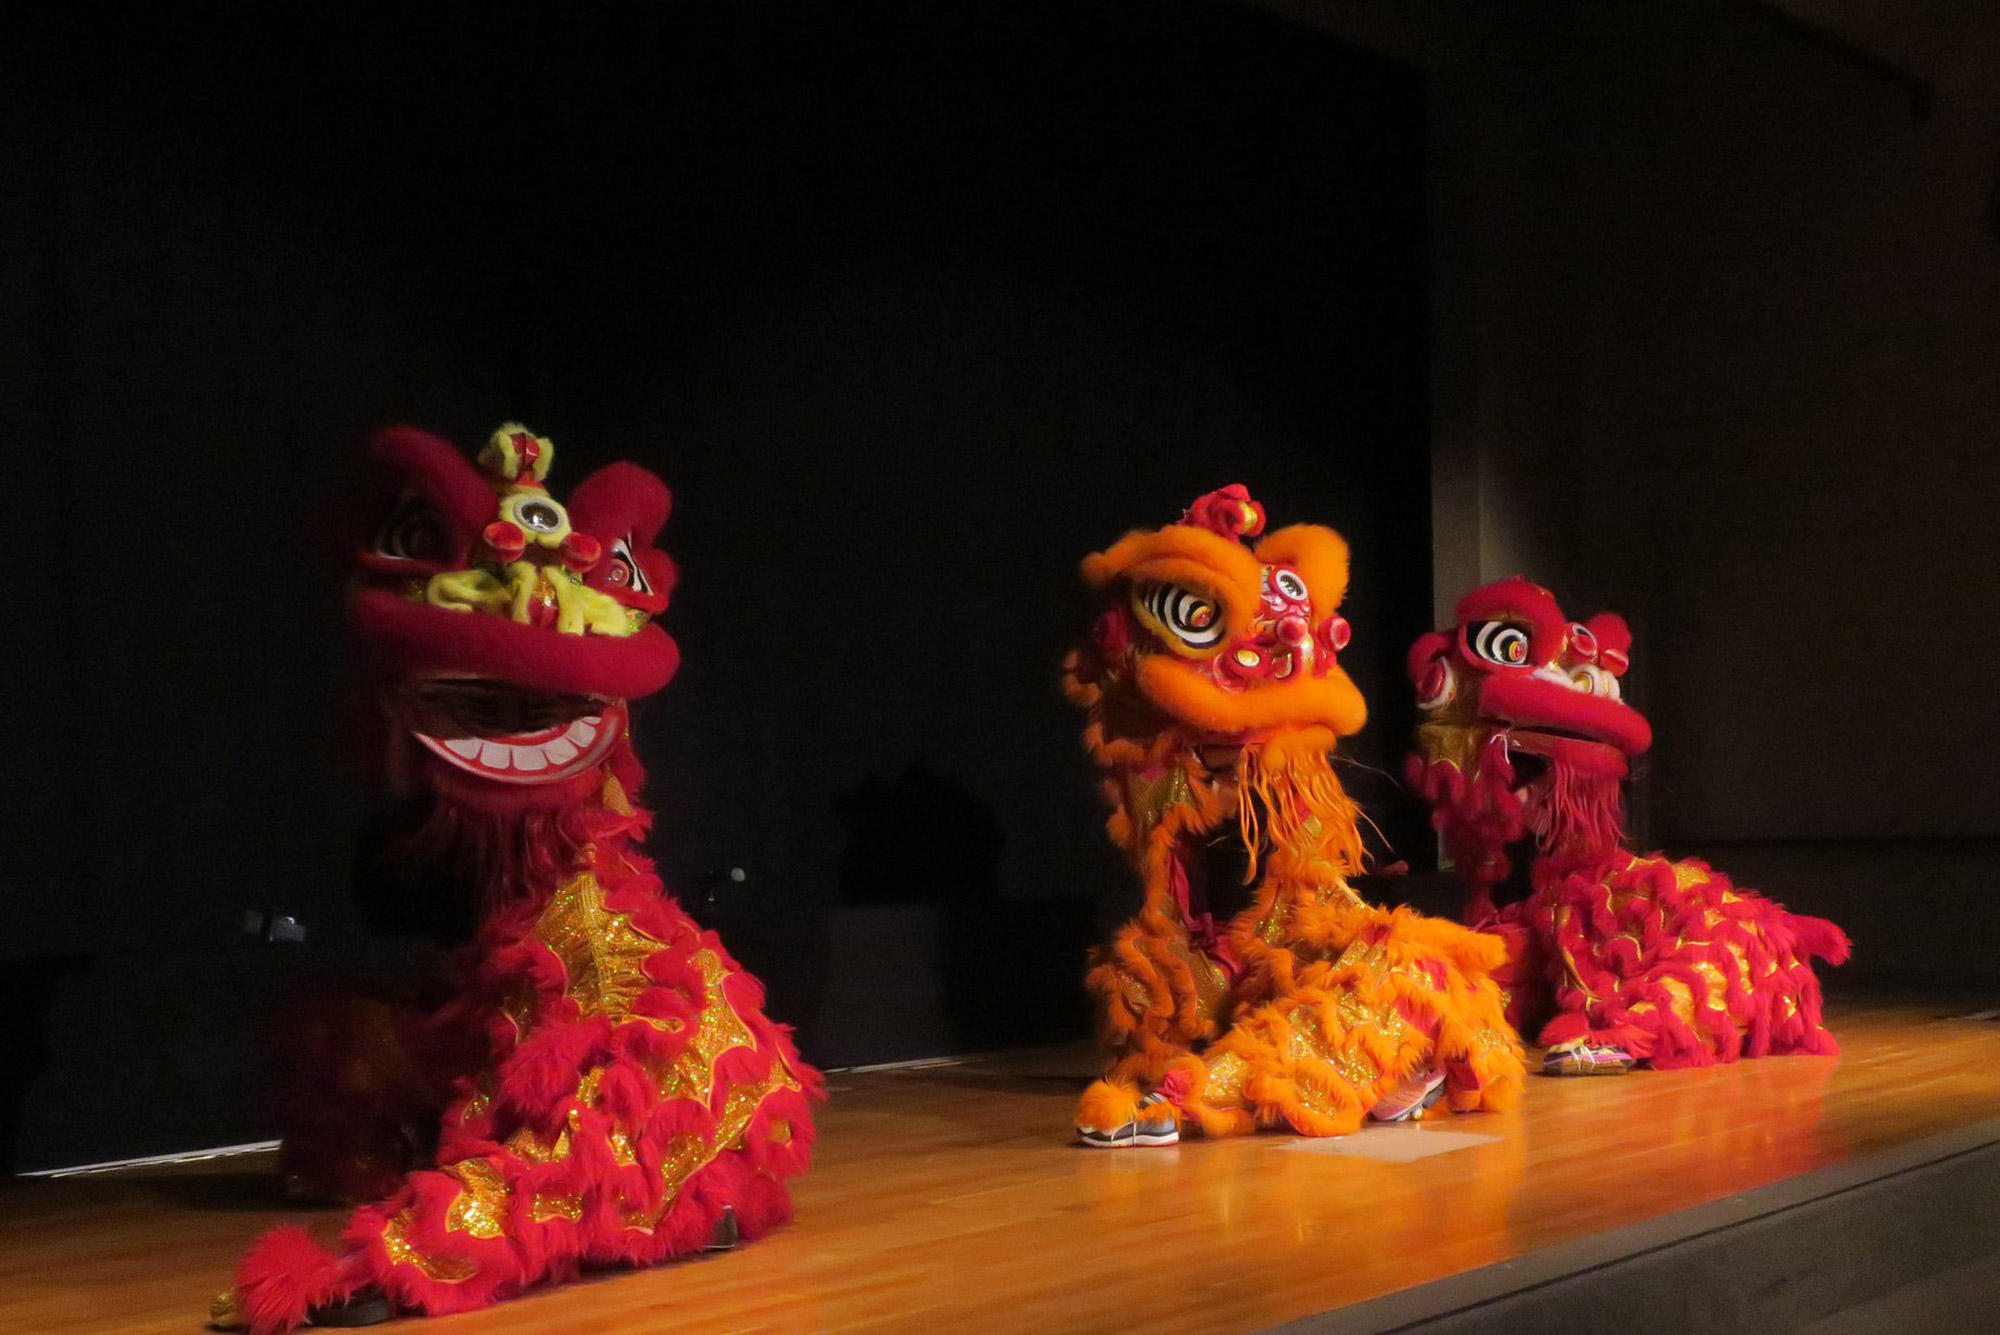 Photo of Gund Kwok, an all-female Asian lion and dragon dance troupe. The members are wearing red and orange dragon costumes during a performance on stage.